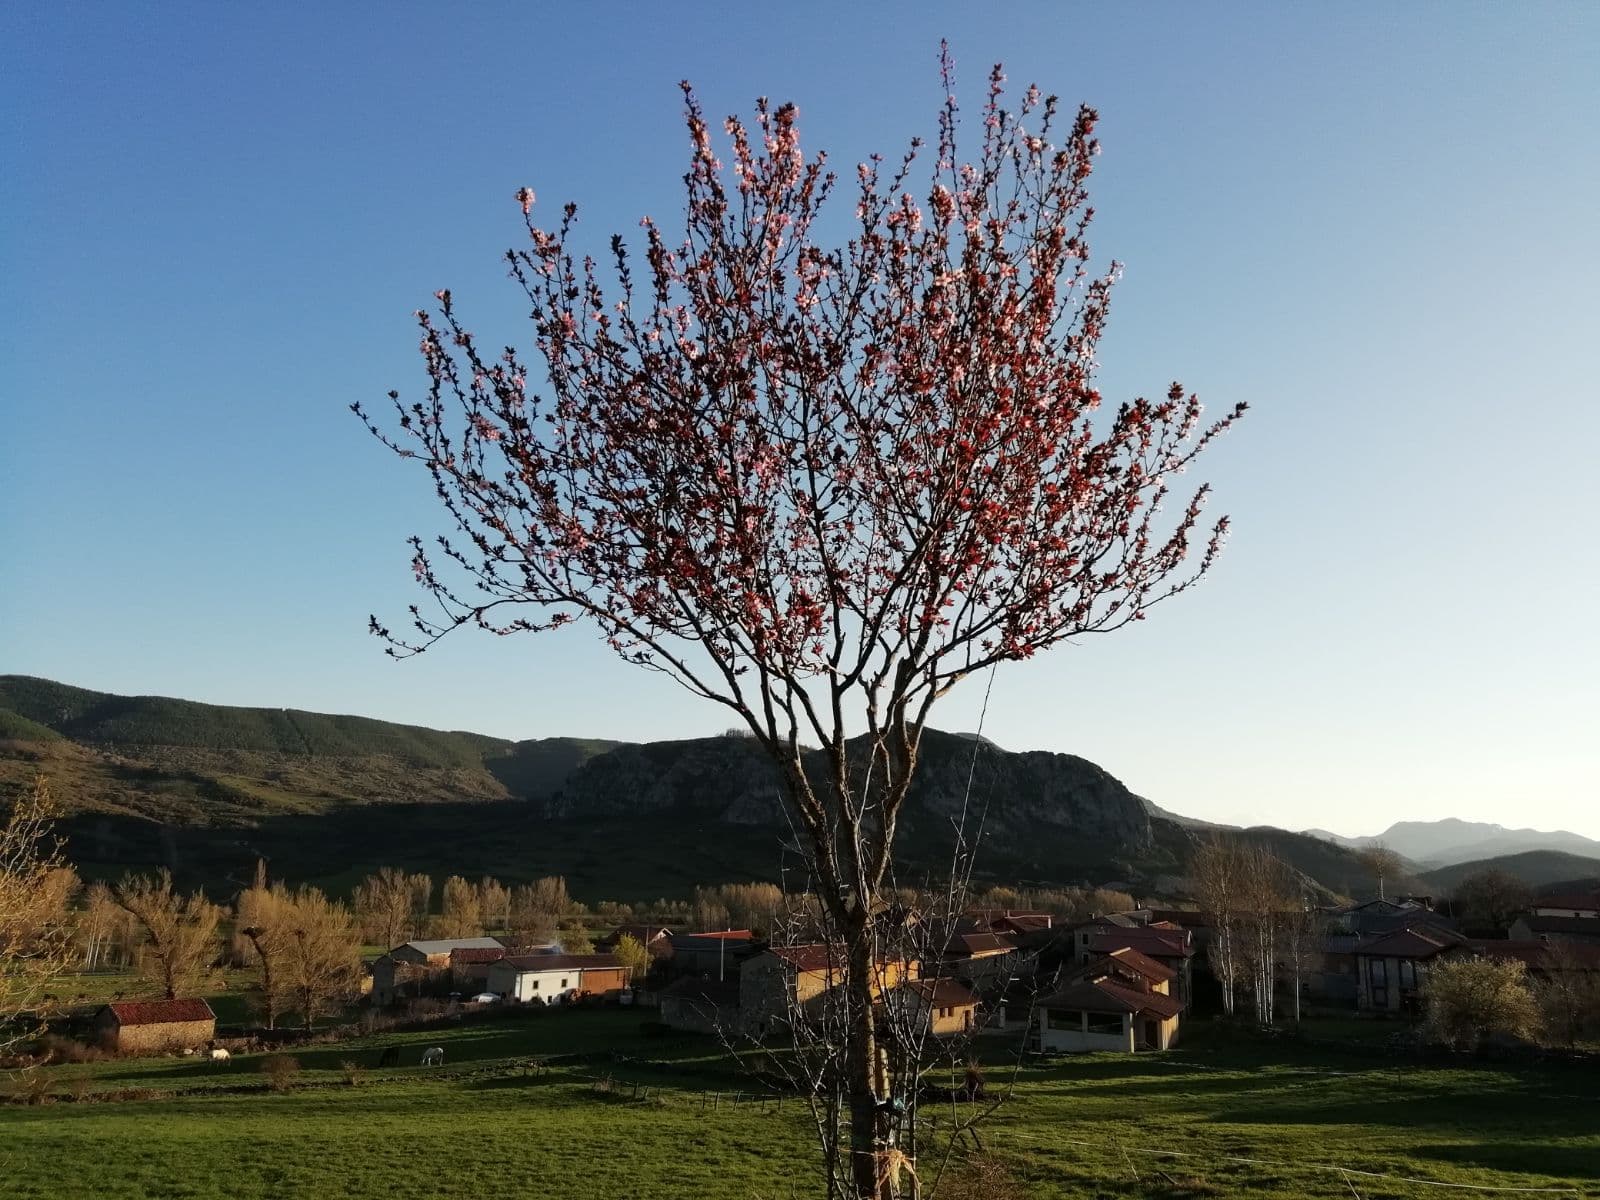 Tree blooming in spring with Pallide in the background